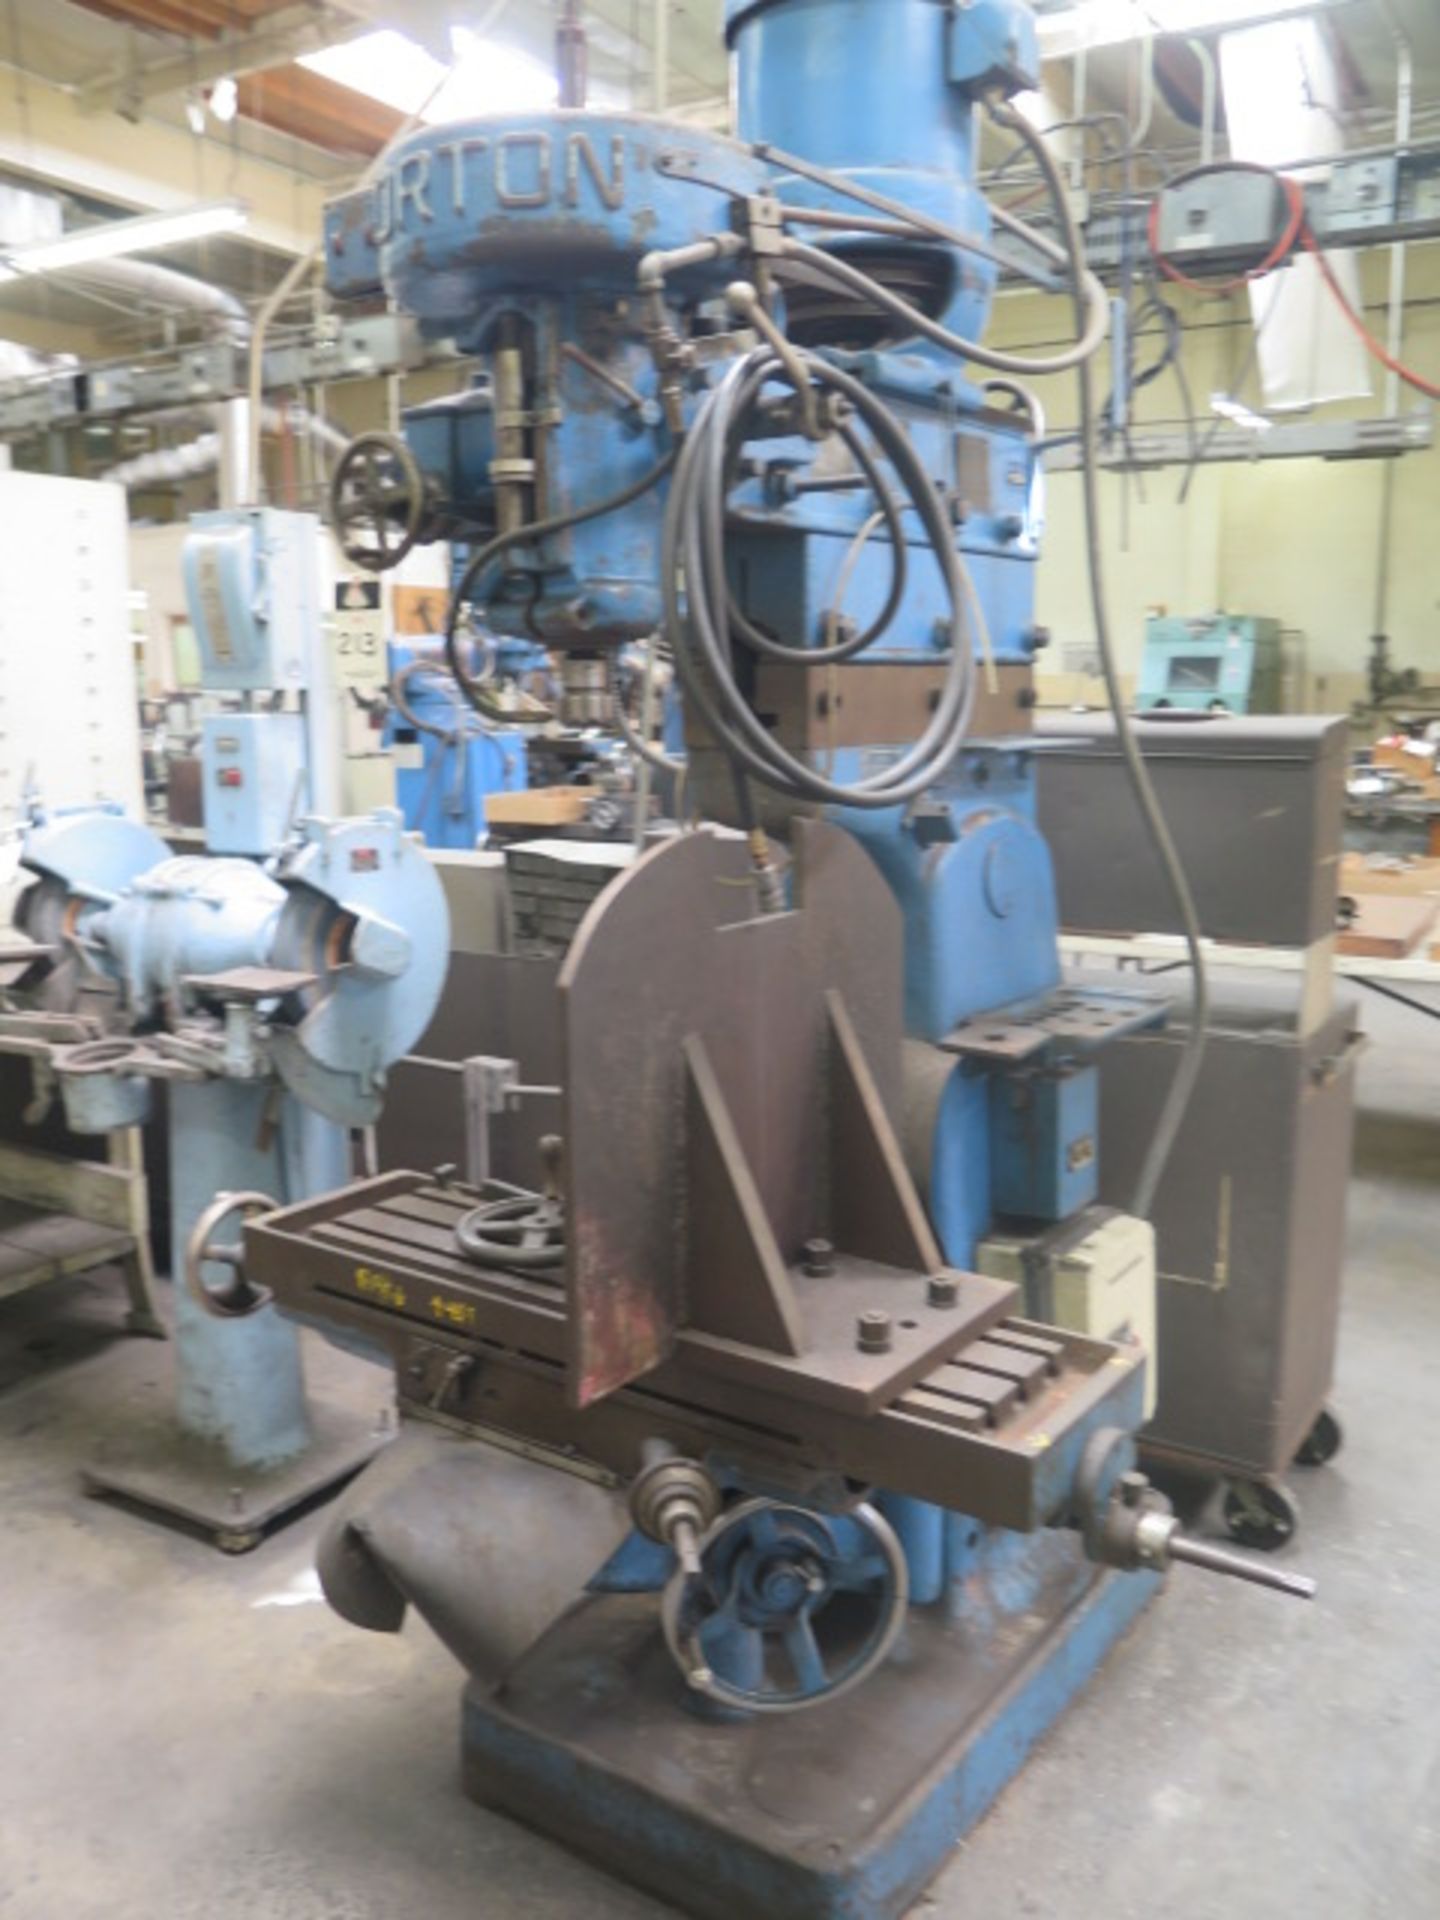 Gorton Vertical Mill s/n 18603 w/ 420-2050 RPM, 7-Speeds, Power Quill, 10 ½” x 41” Table - Image 2 of 8